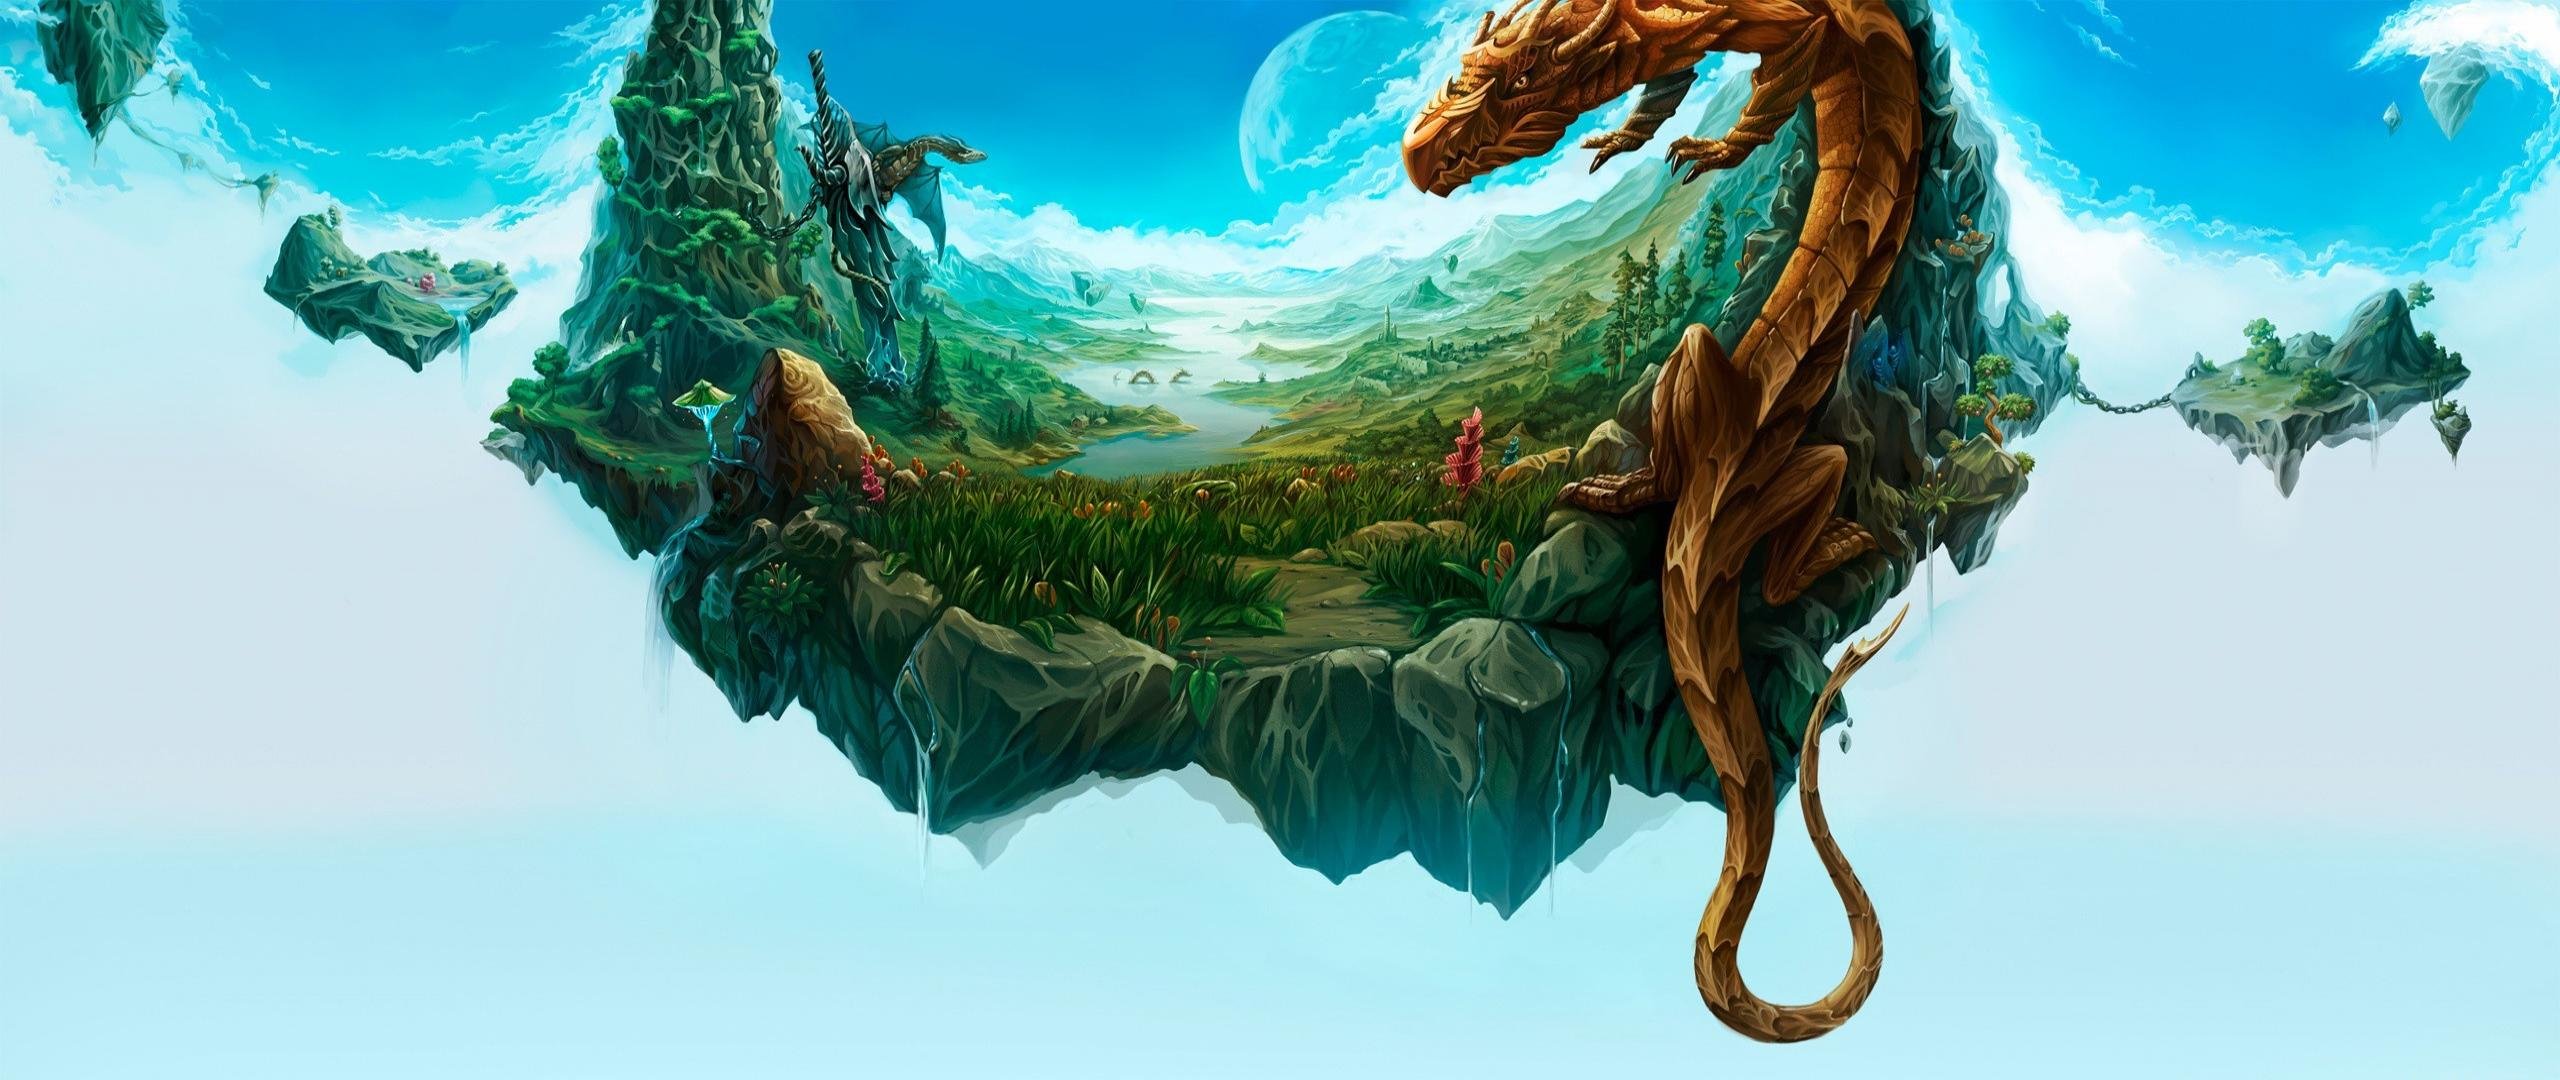 Download HD 2560x1080 Dragon PC background for free